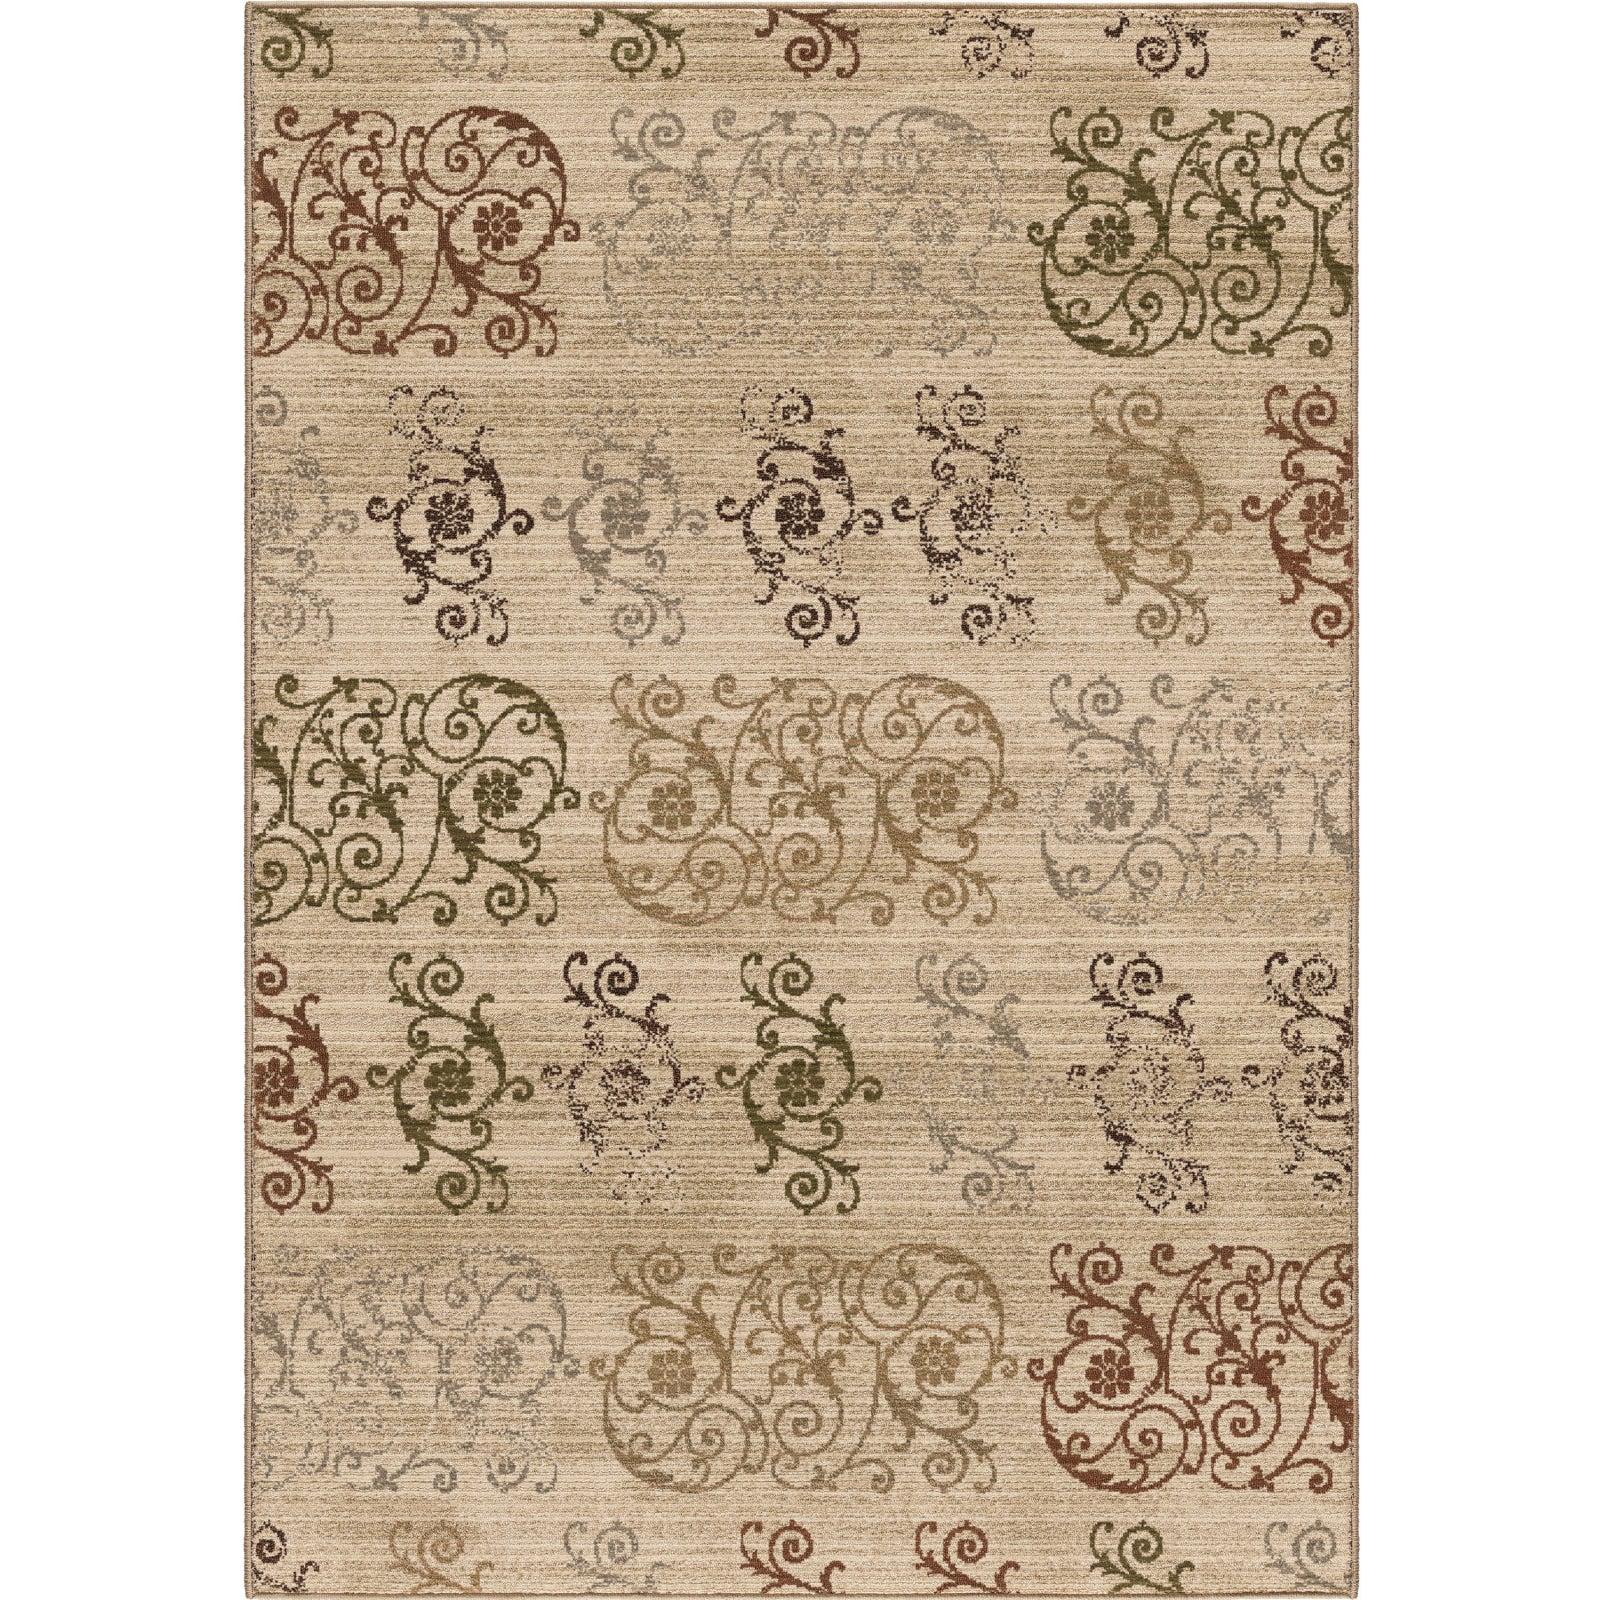 Orian Rugs Virtuous Neutral Damask Beige Area Rug main image